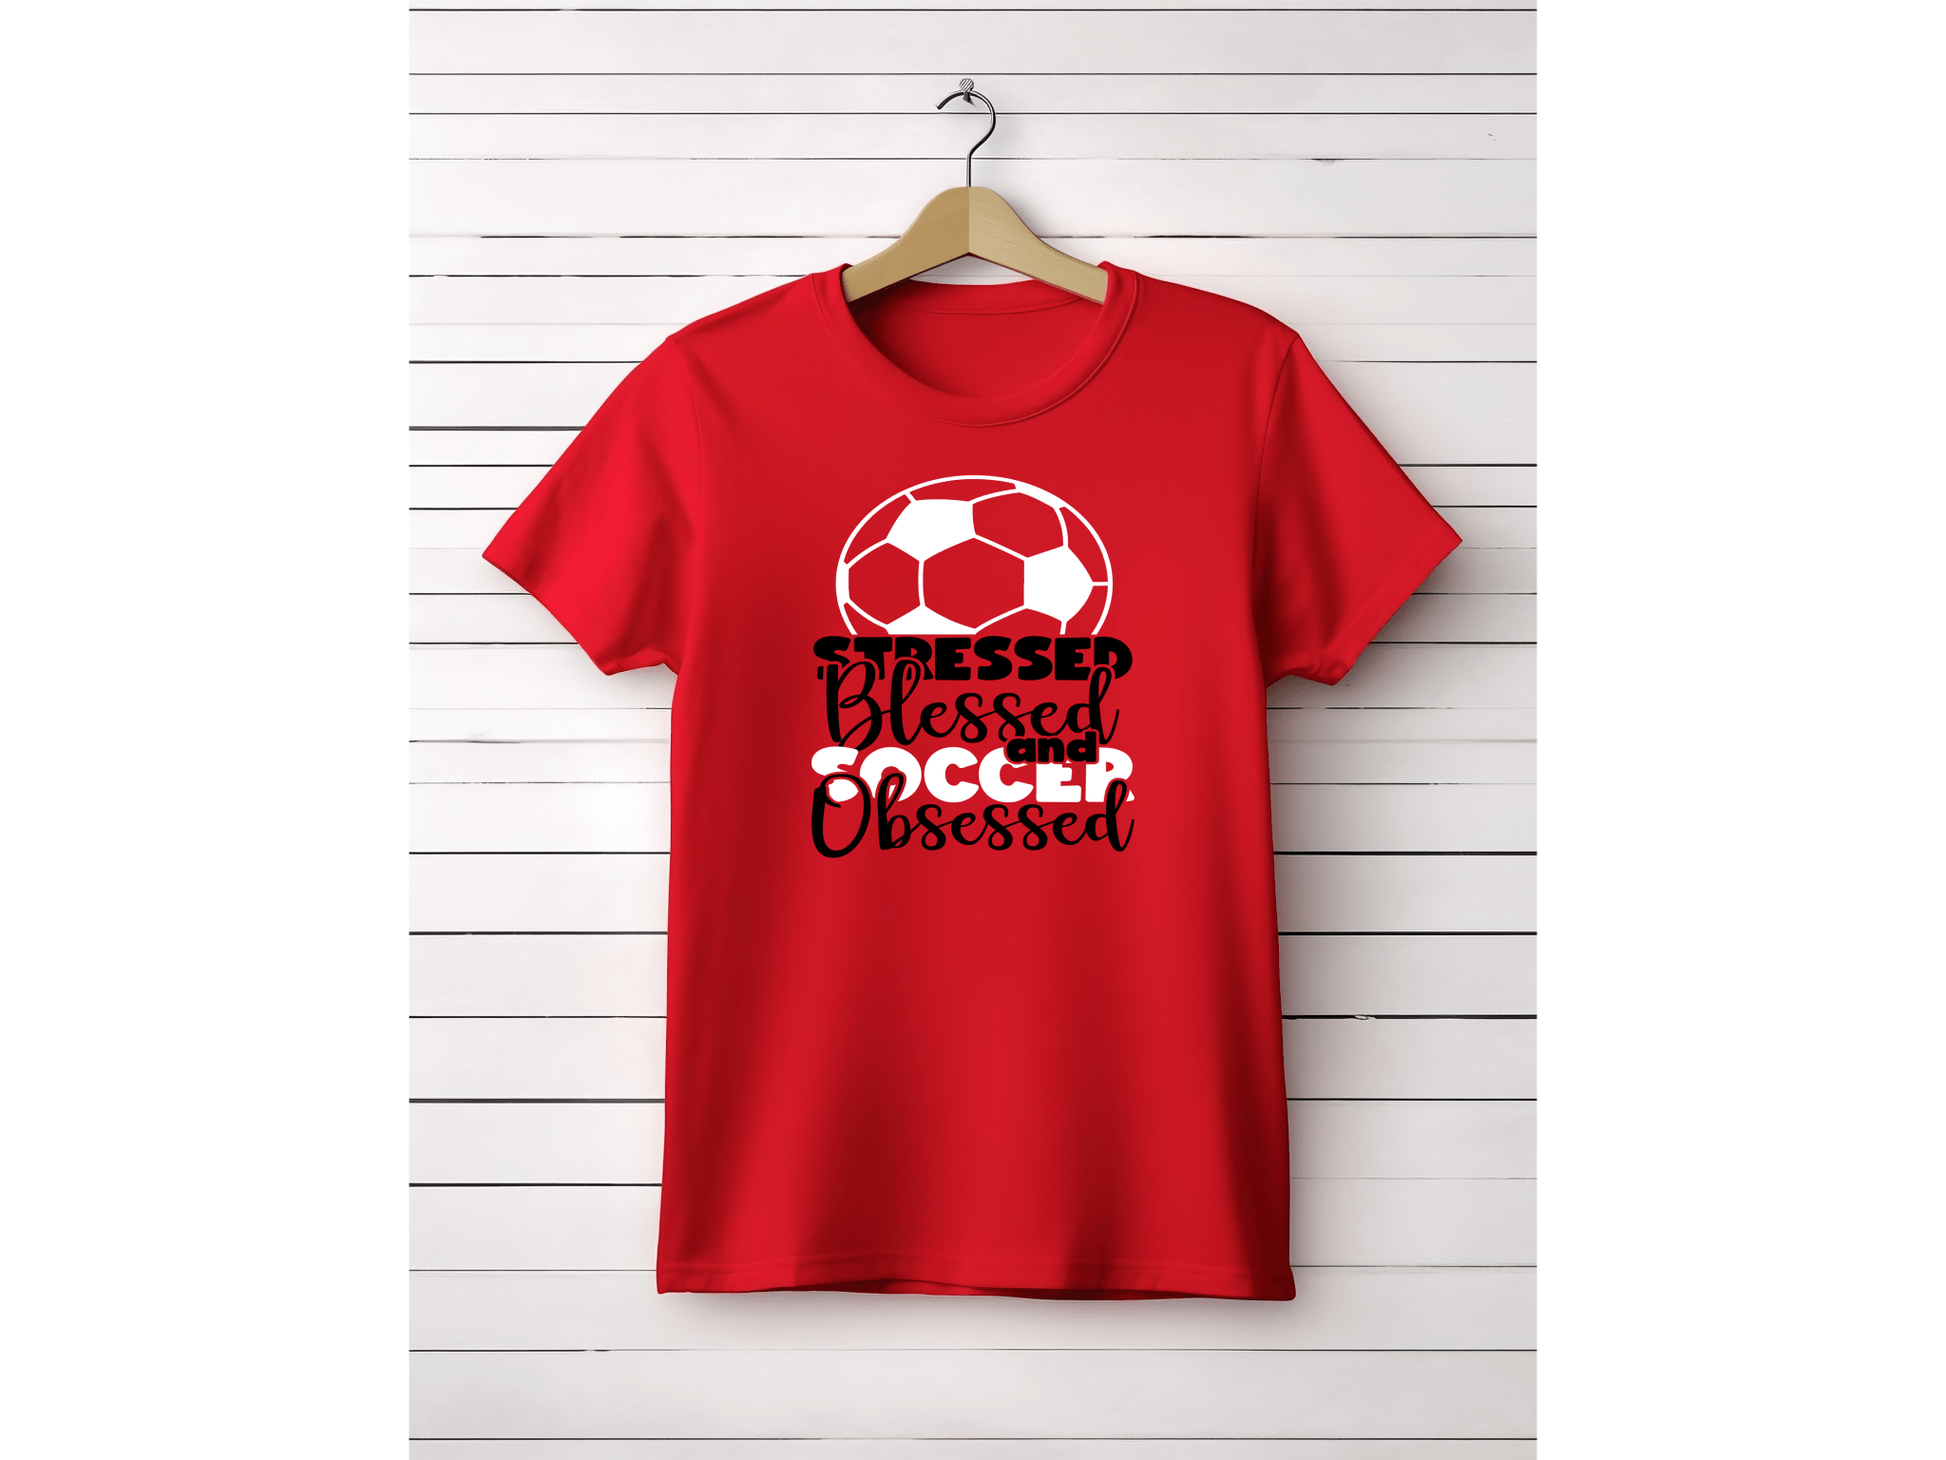 Stressed, Blessed and Soccer Obsessed Top - smuniqueshirts